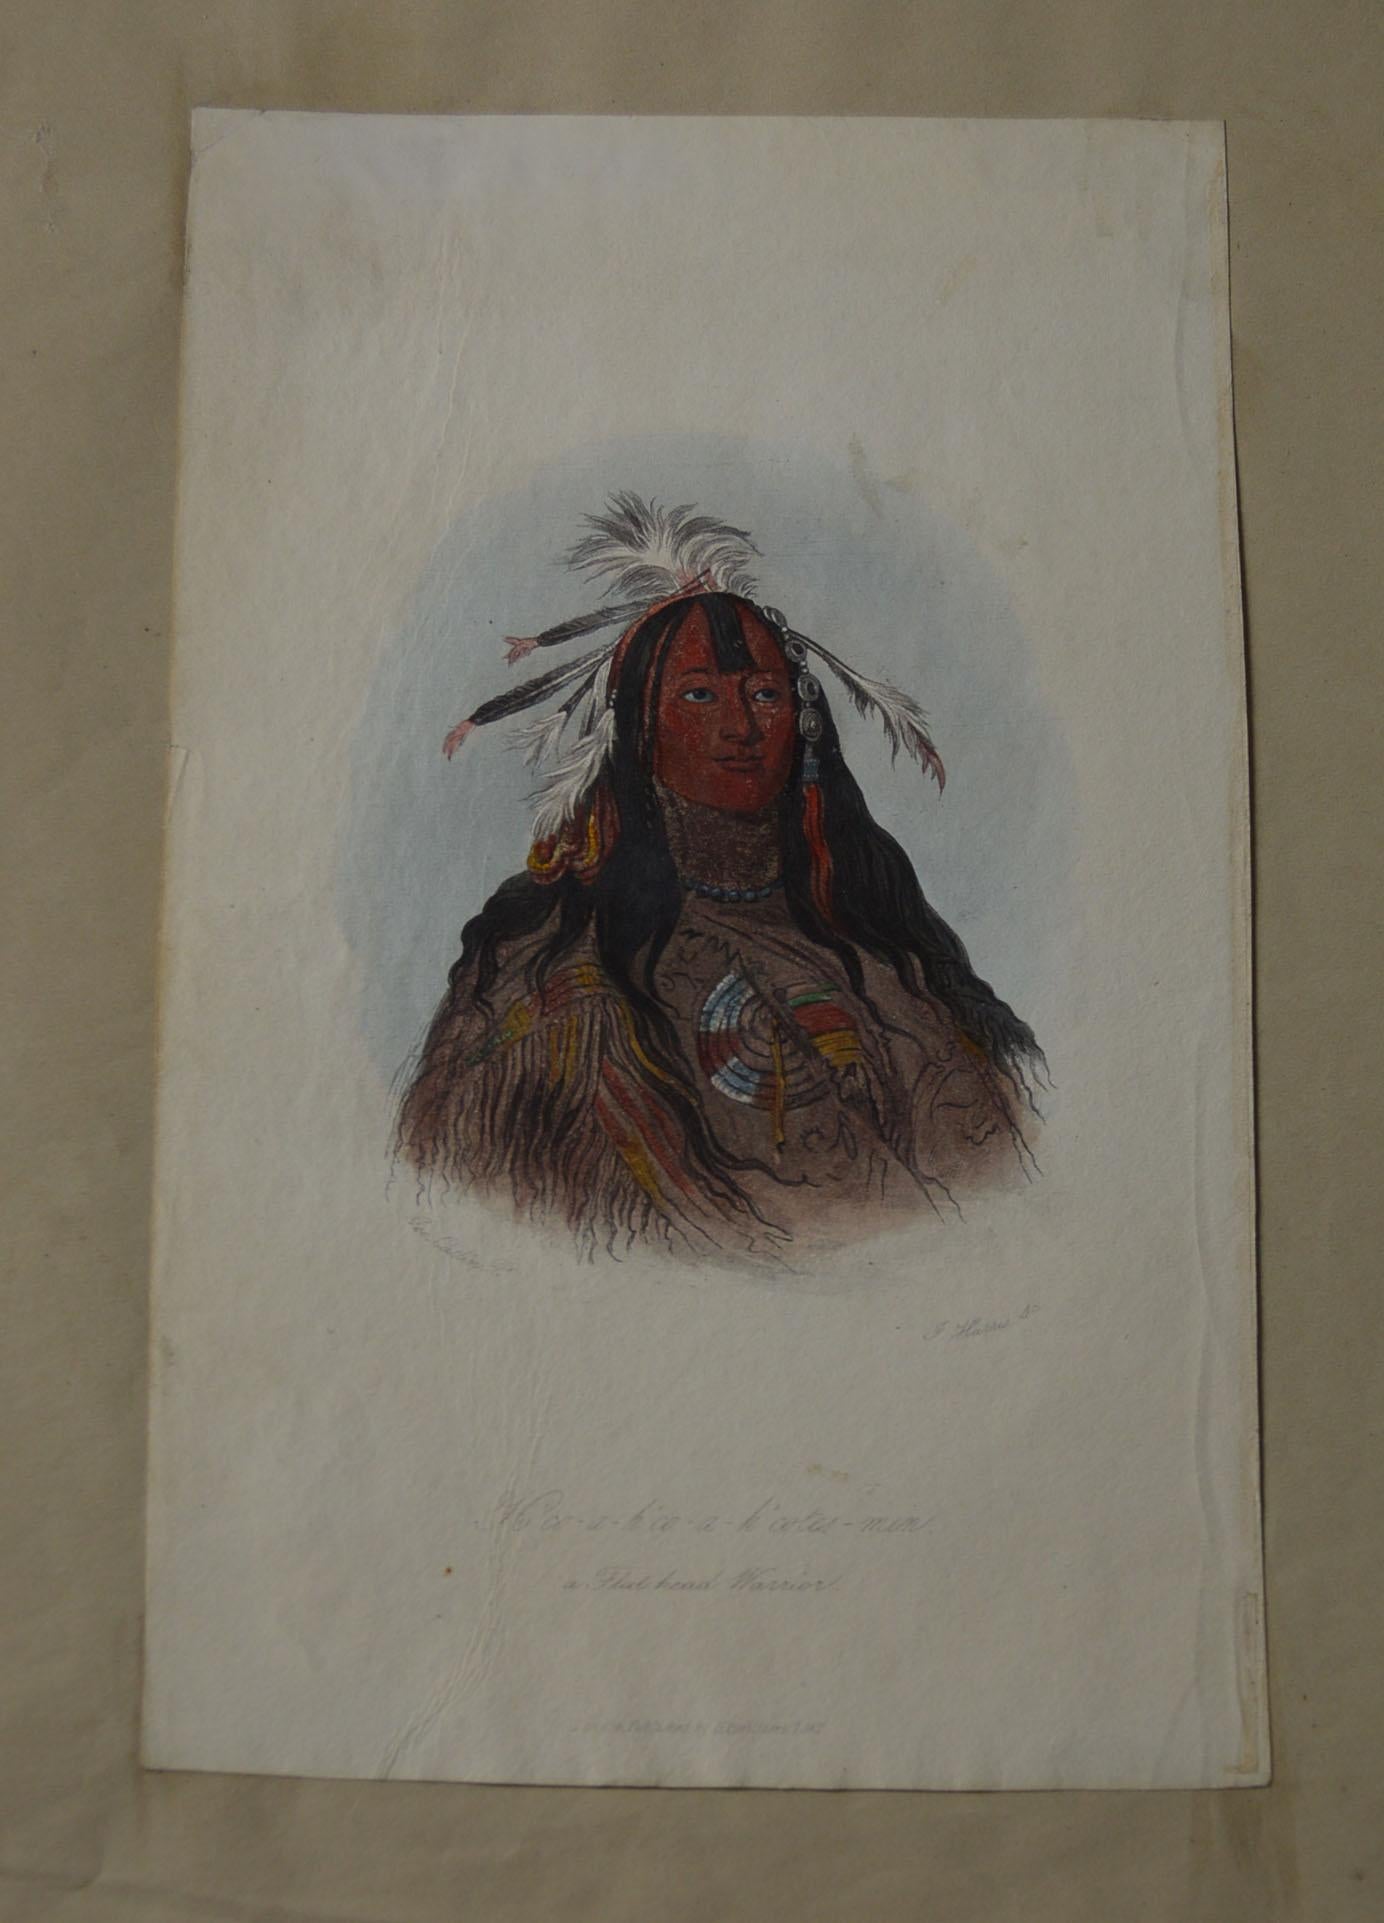 Antique coloured Lithograph print Native American flat head warrior 1842
Native American flat head warrior 'H'Co-A-H'Co-A-H'Cotes-Min'.1842 
Size 9 x 6 inches on mounting paper 
Condition: Good minor age wear.
   